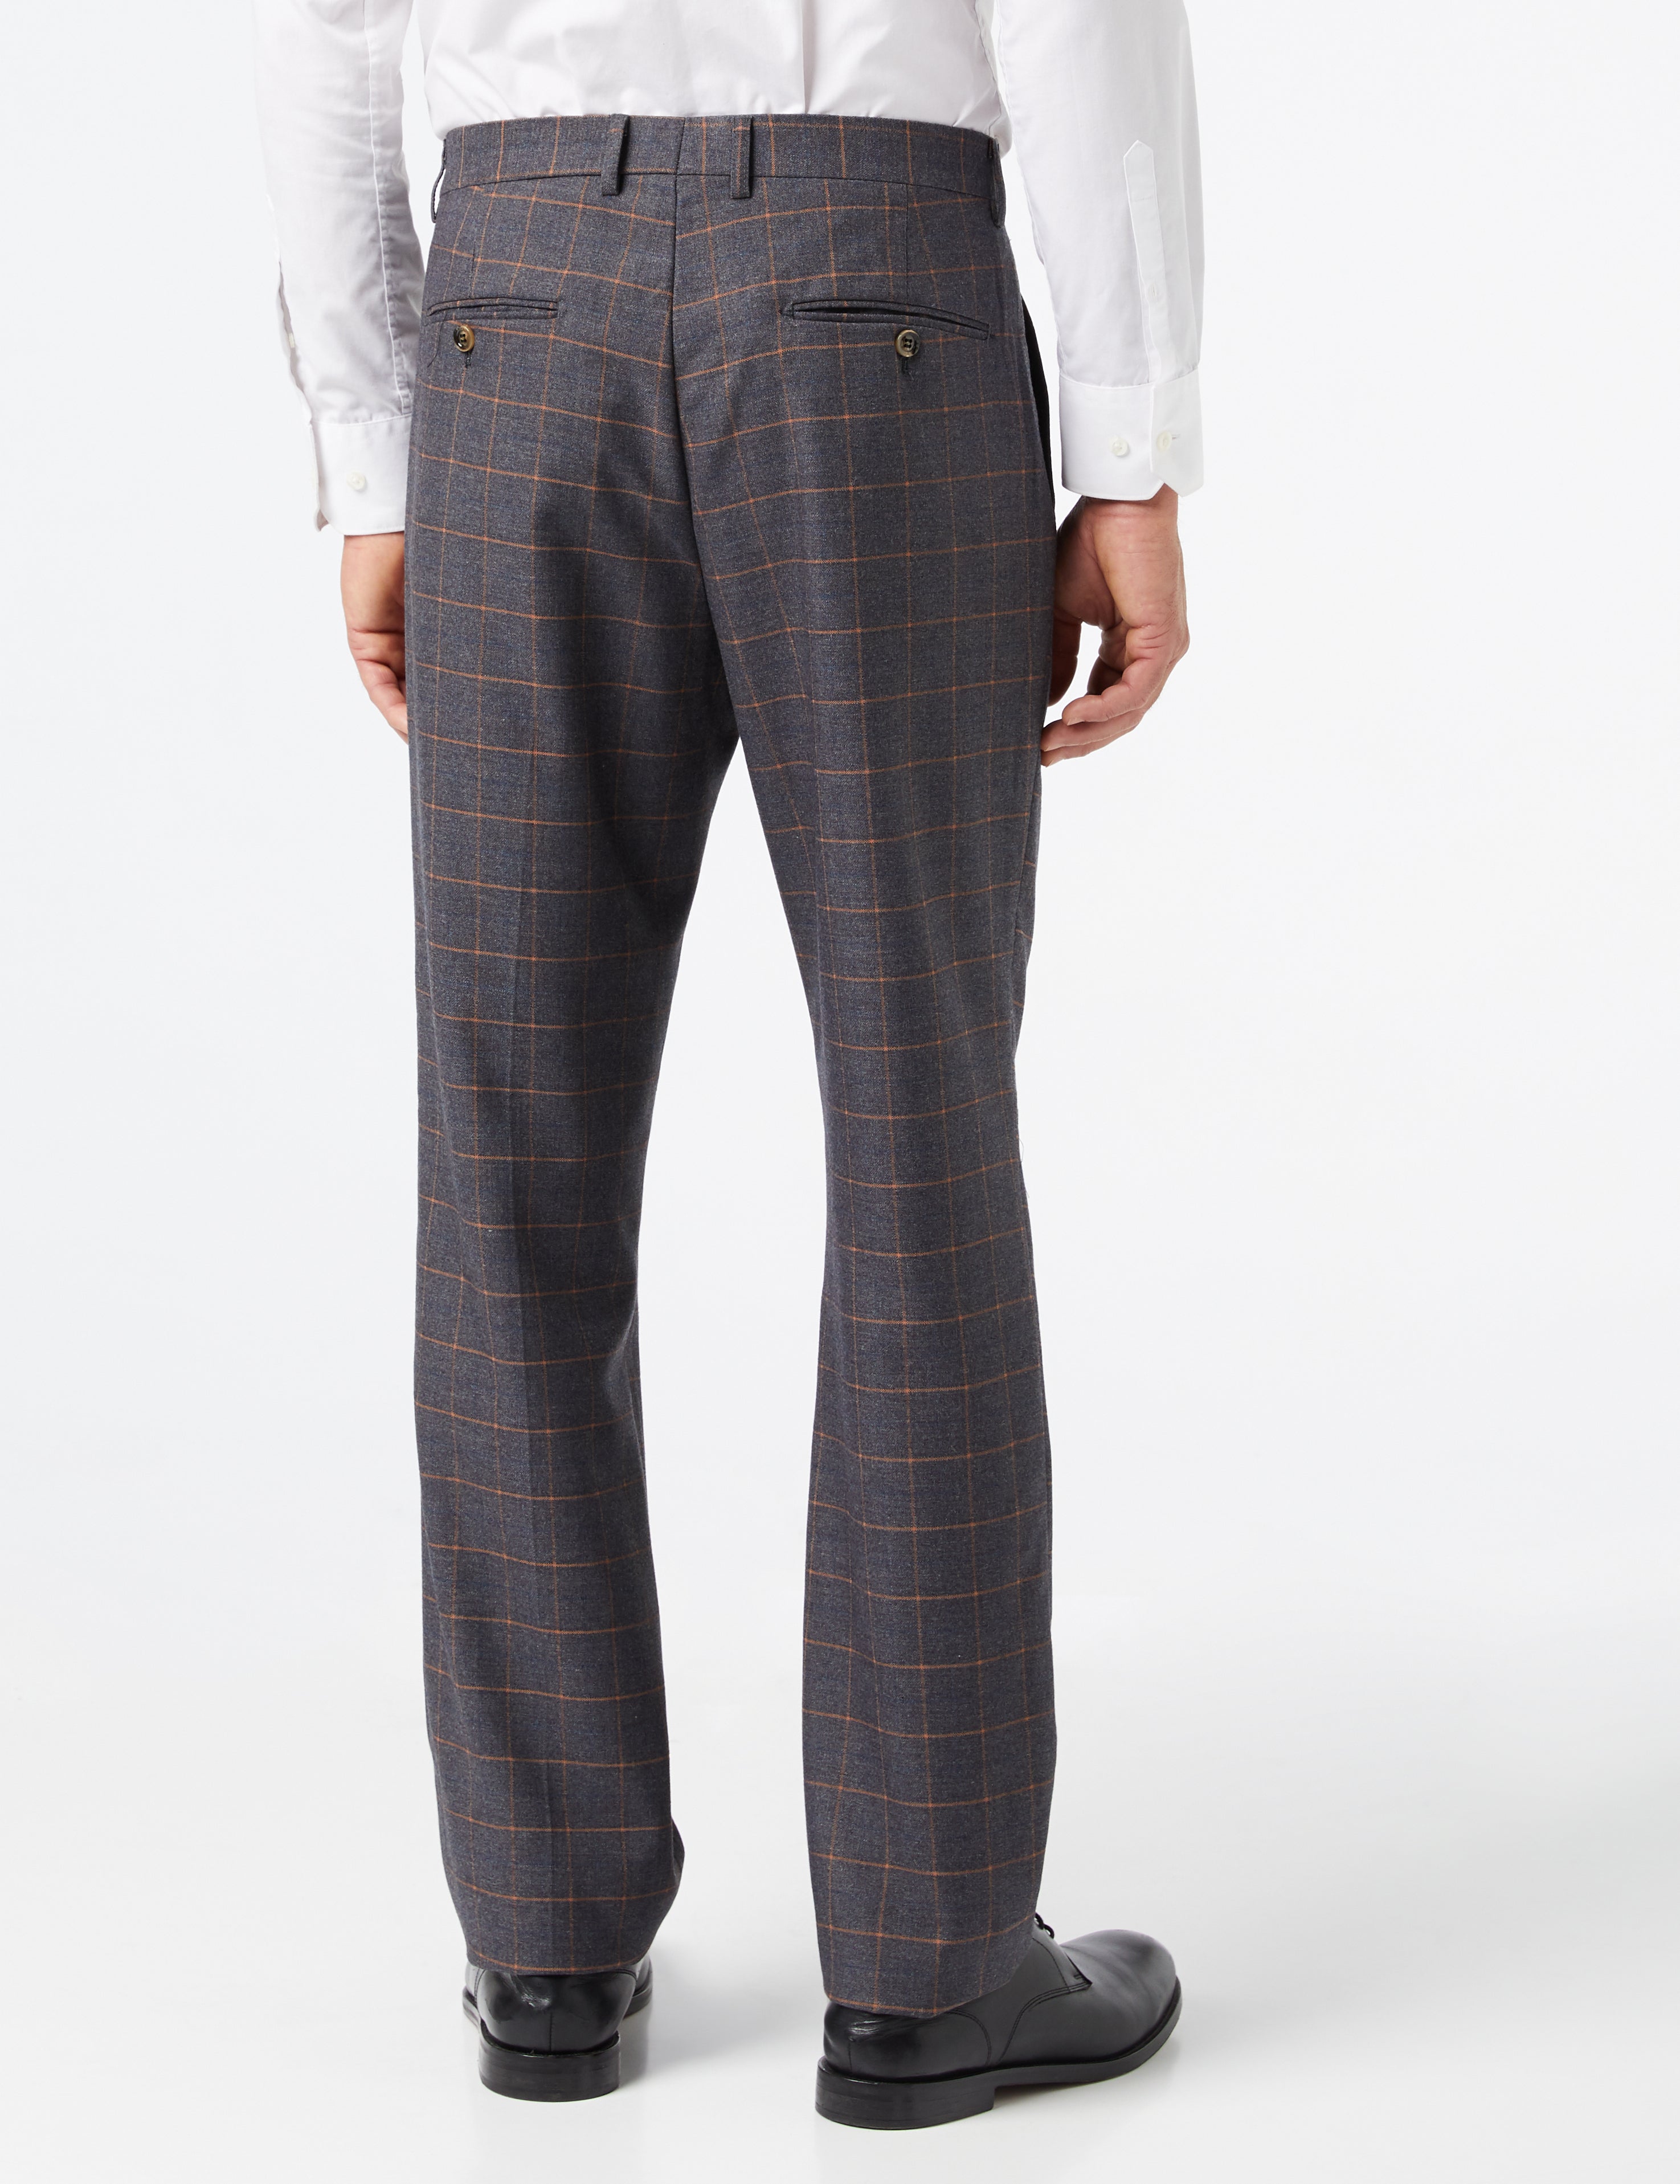 ROGER - GREY CHECK SUIT